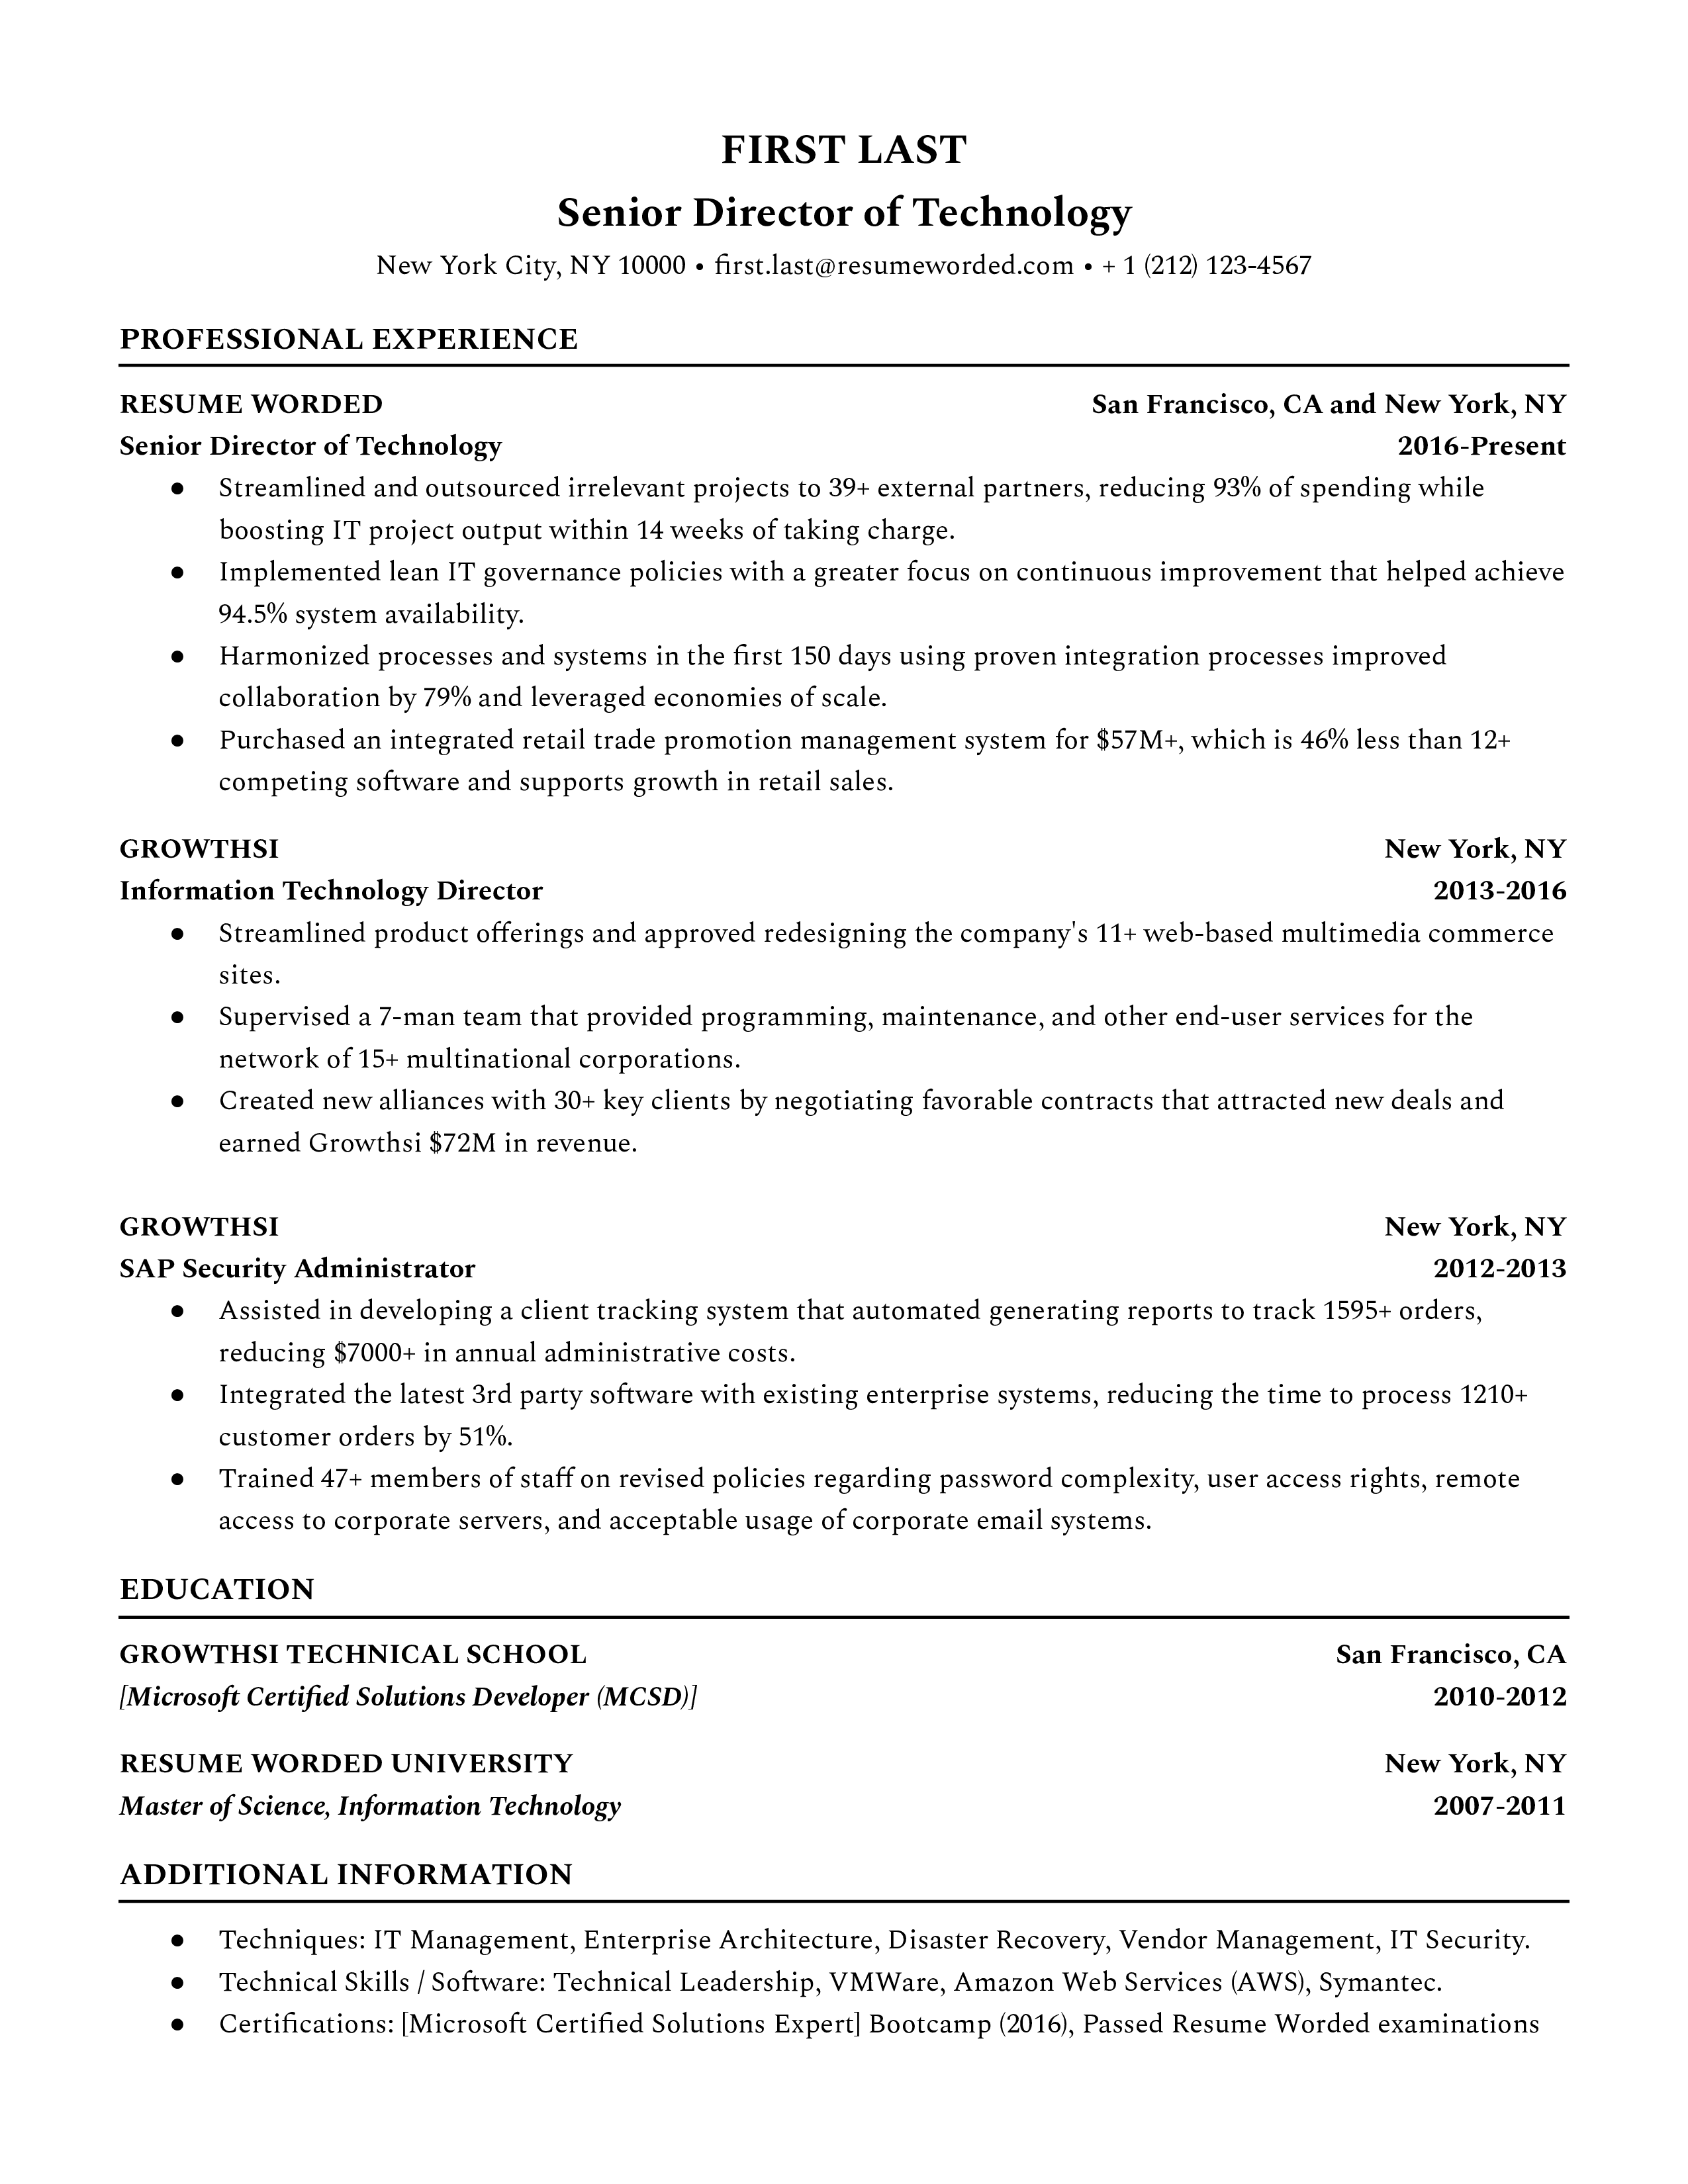 A senior director of technology resume template using strong action verbs